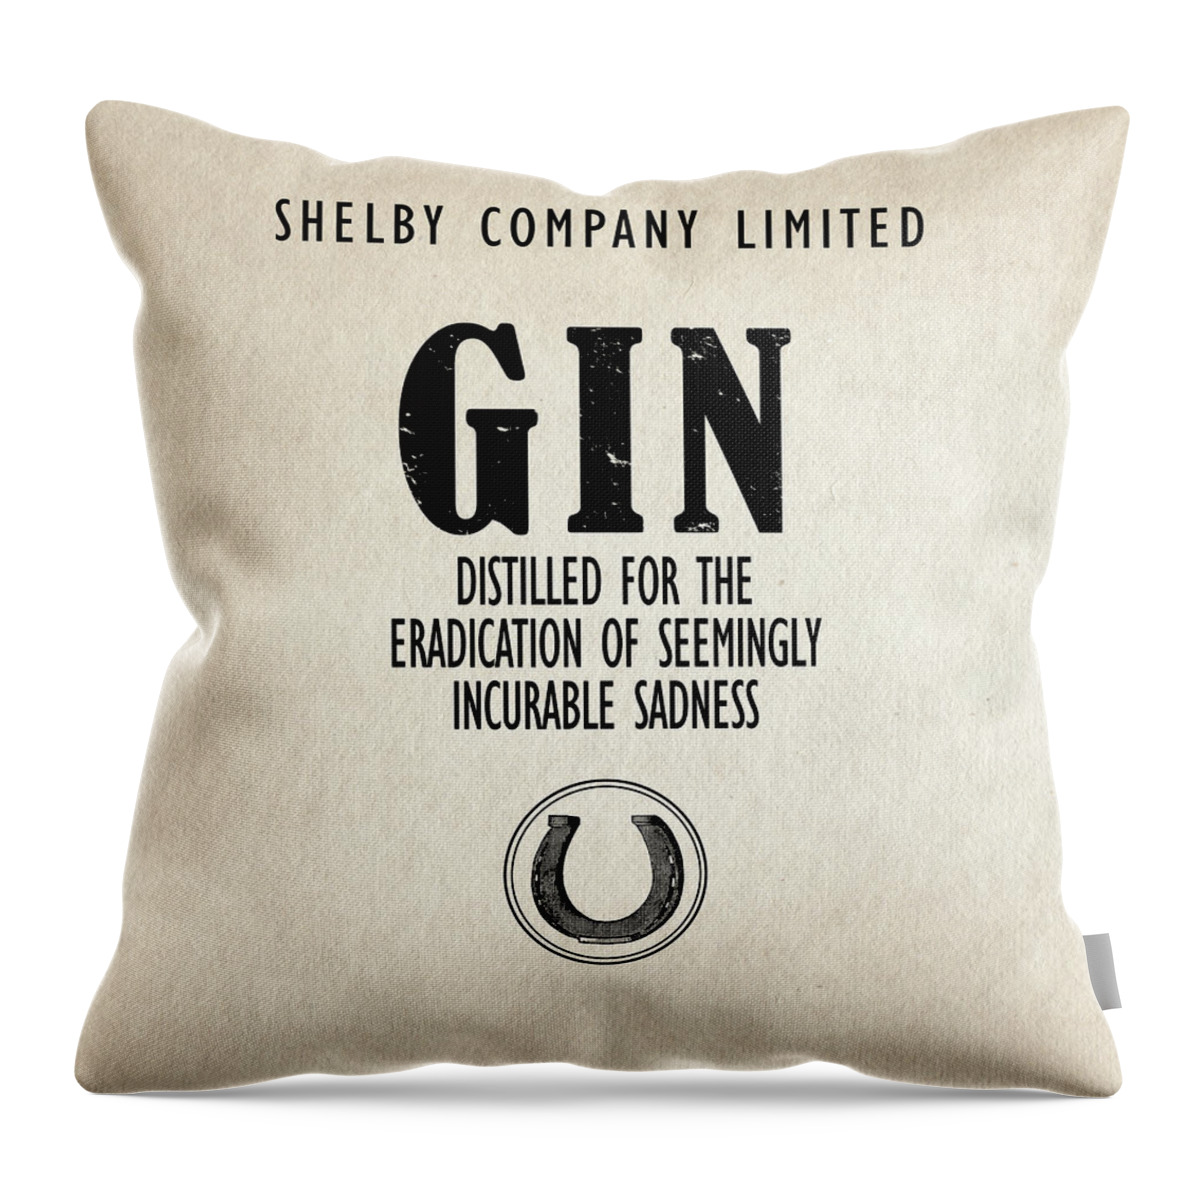 Shelby Company Throw Pillow featuring the photograph Gin The Eradication of Sadness by Mark Rogan